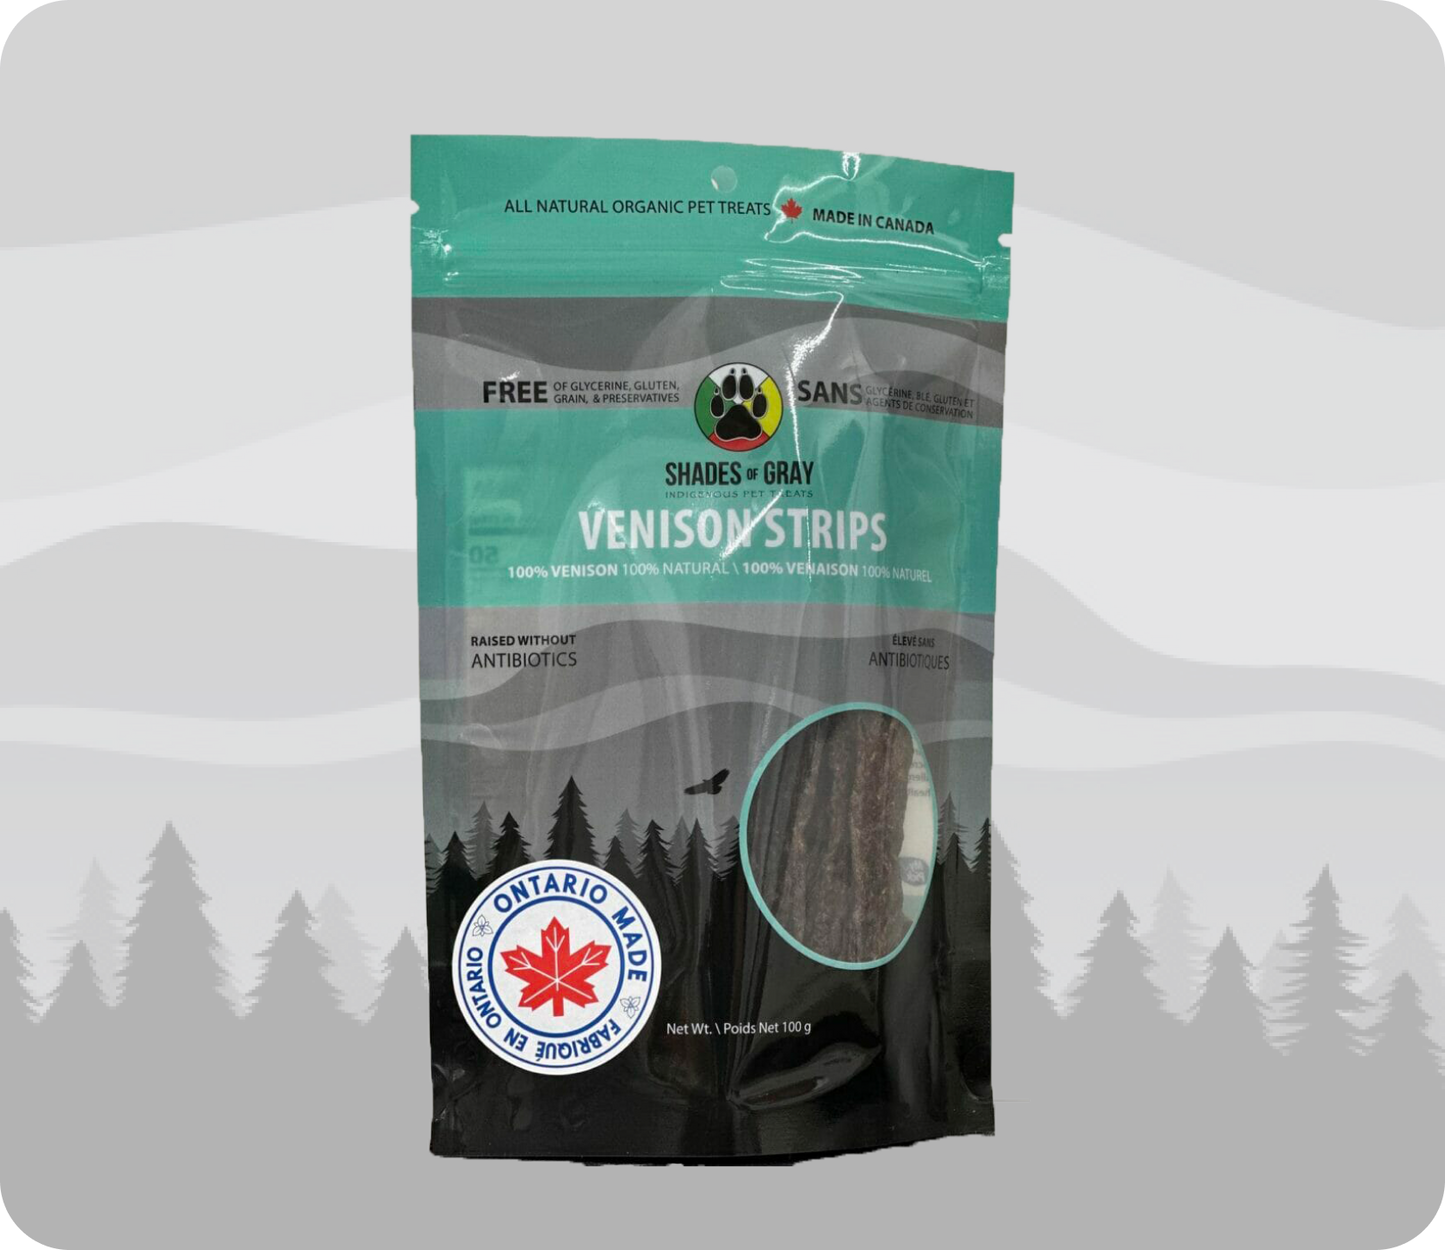 Venison Strips pet treats made with organic all natural 100% Venison, for your cats and dogs. Free of Glycerine, Gluten, Grain & Preservatives.